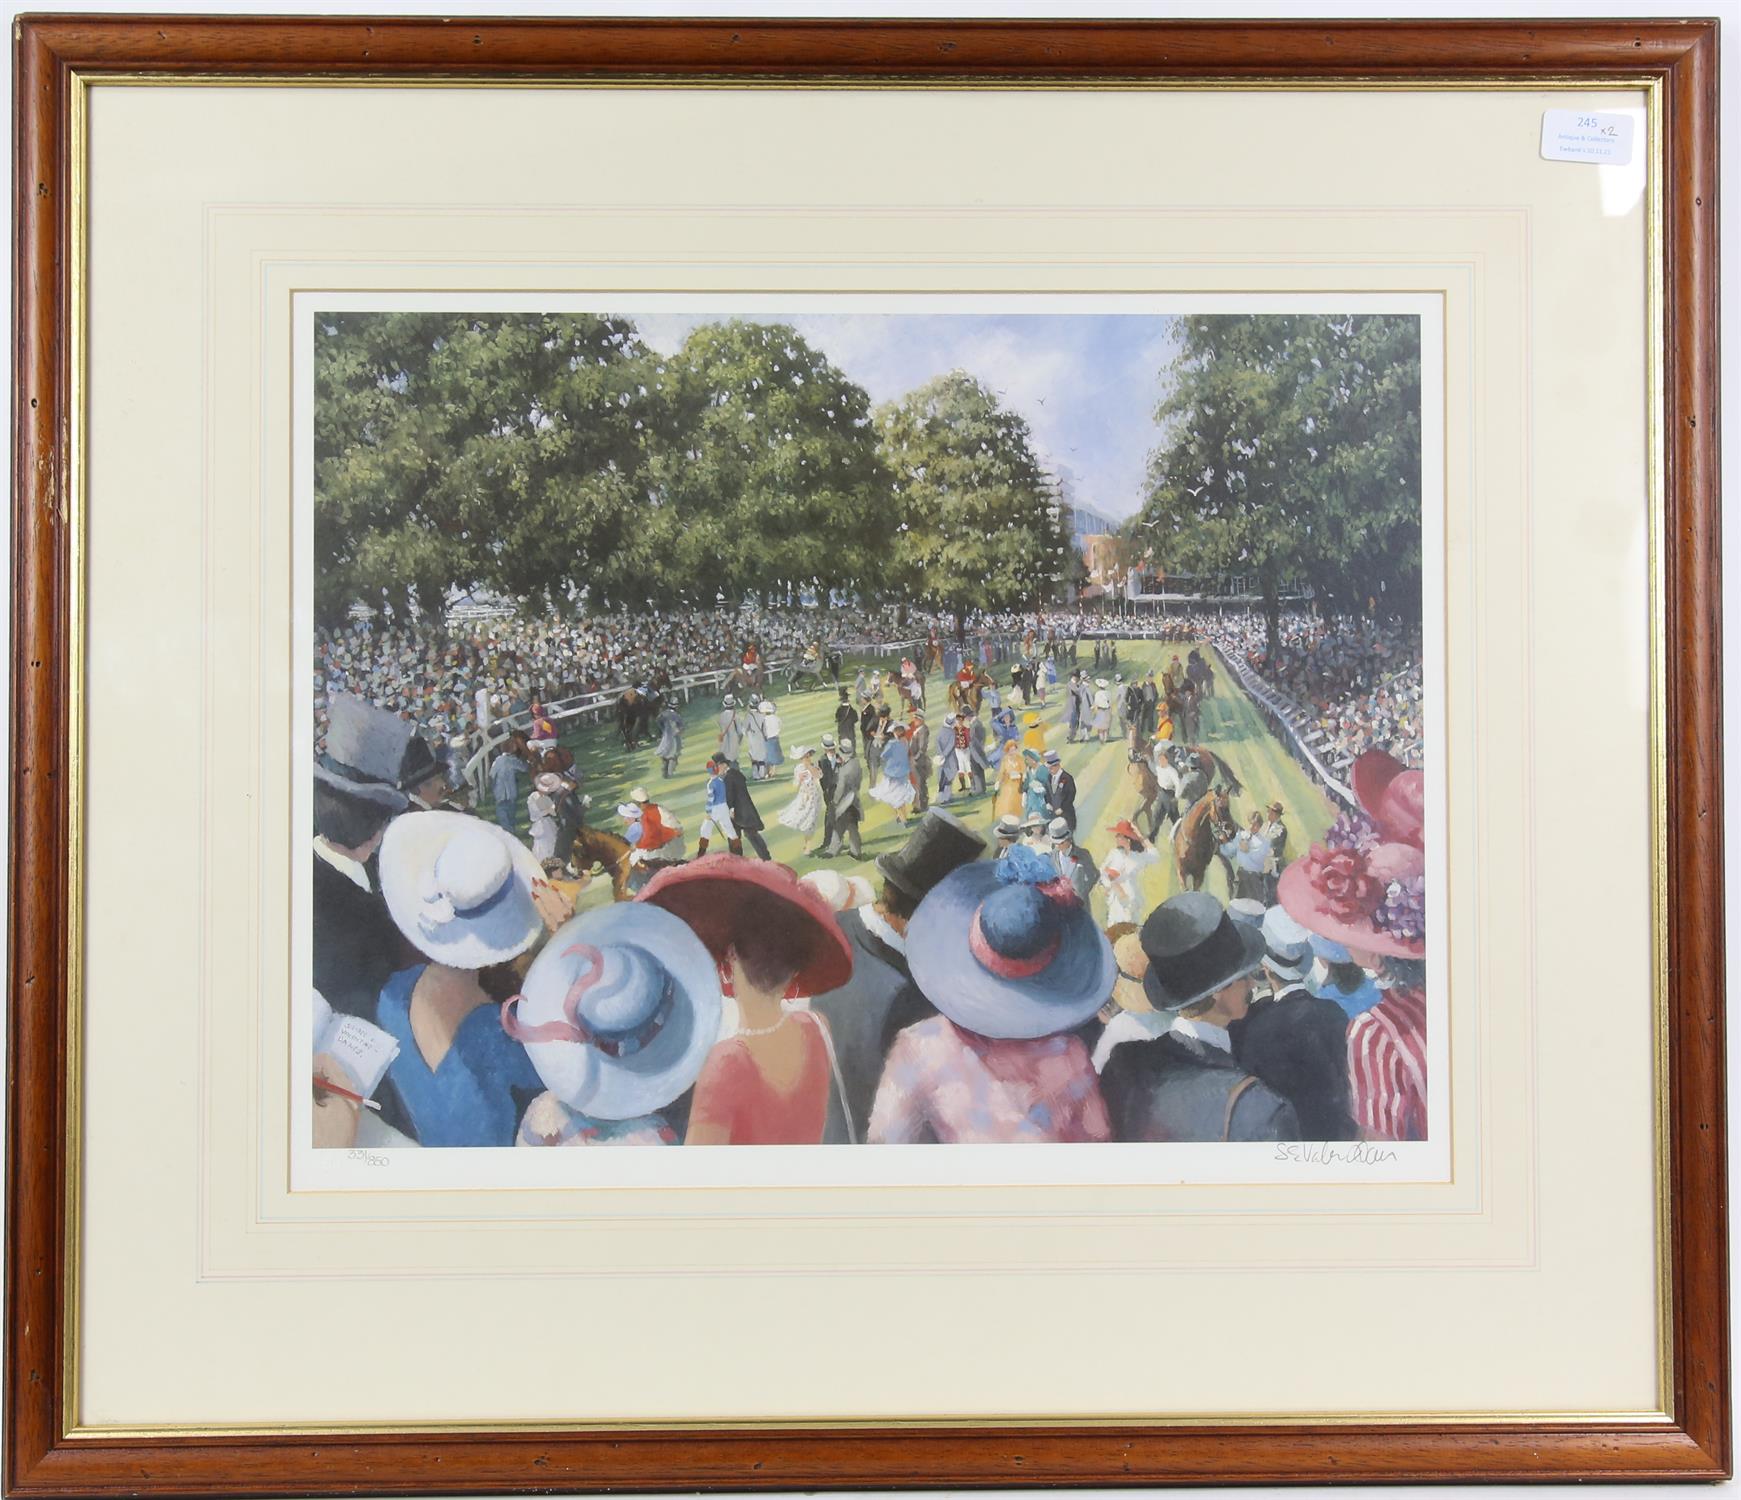 Sherree Valentine-Daines (b. 1959), crowds at the races. Signed and numbered 331/850 in pencil to